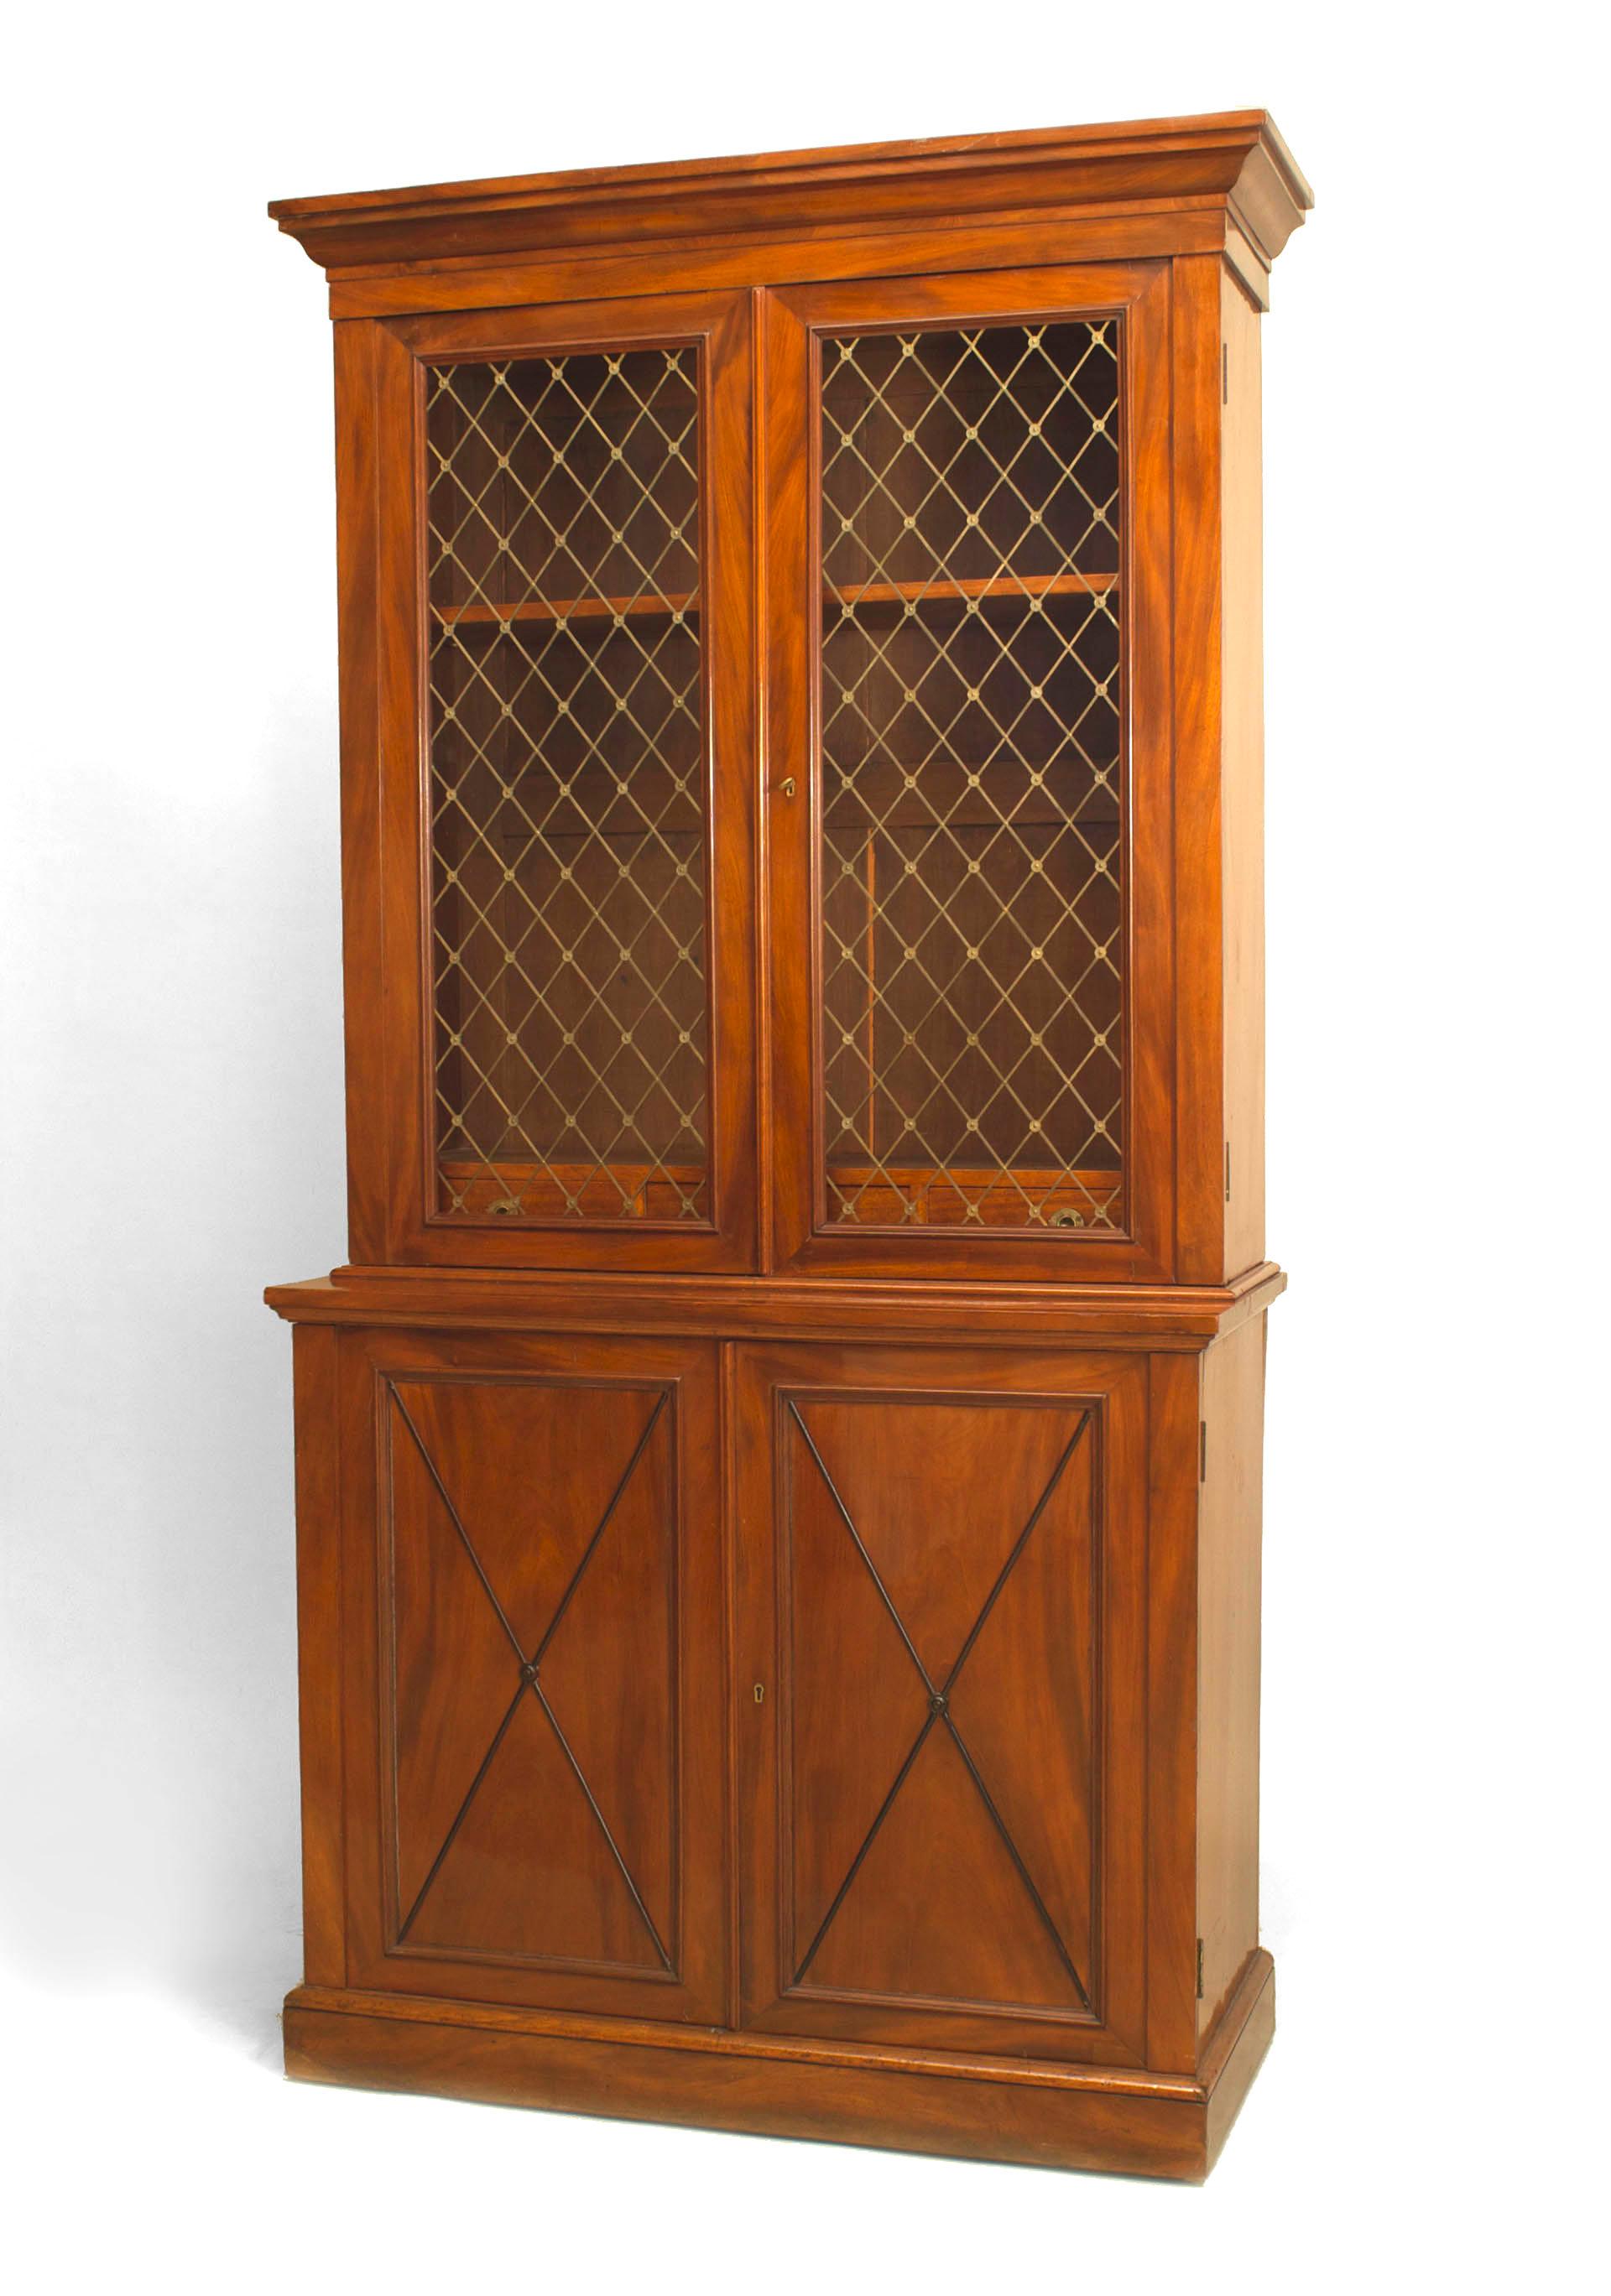 Pair of nineteenth century English mahogany bookcases, each featuring two upper glass doors decorated with brass lattices and two lower doors decorated with an ebonized 